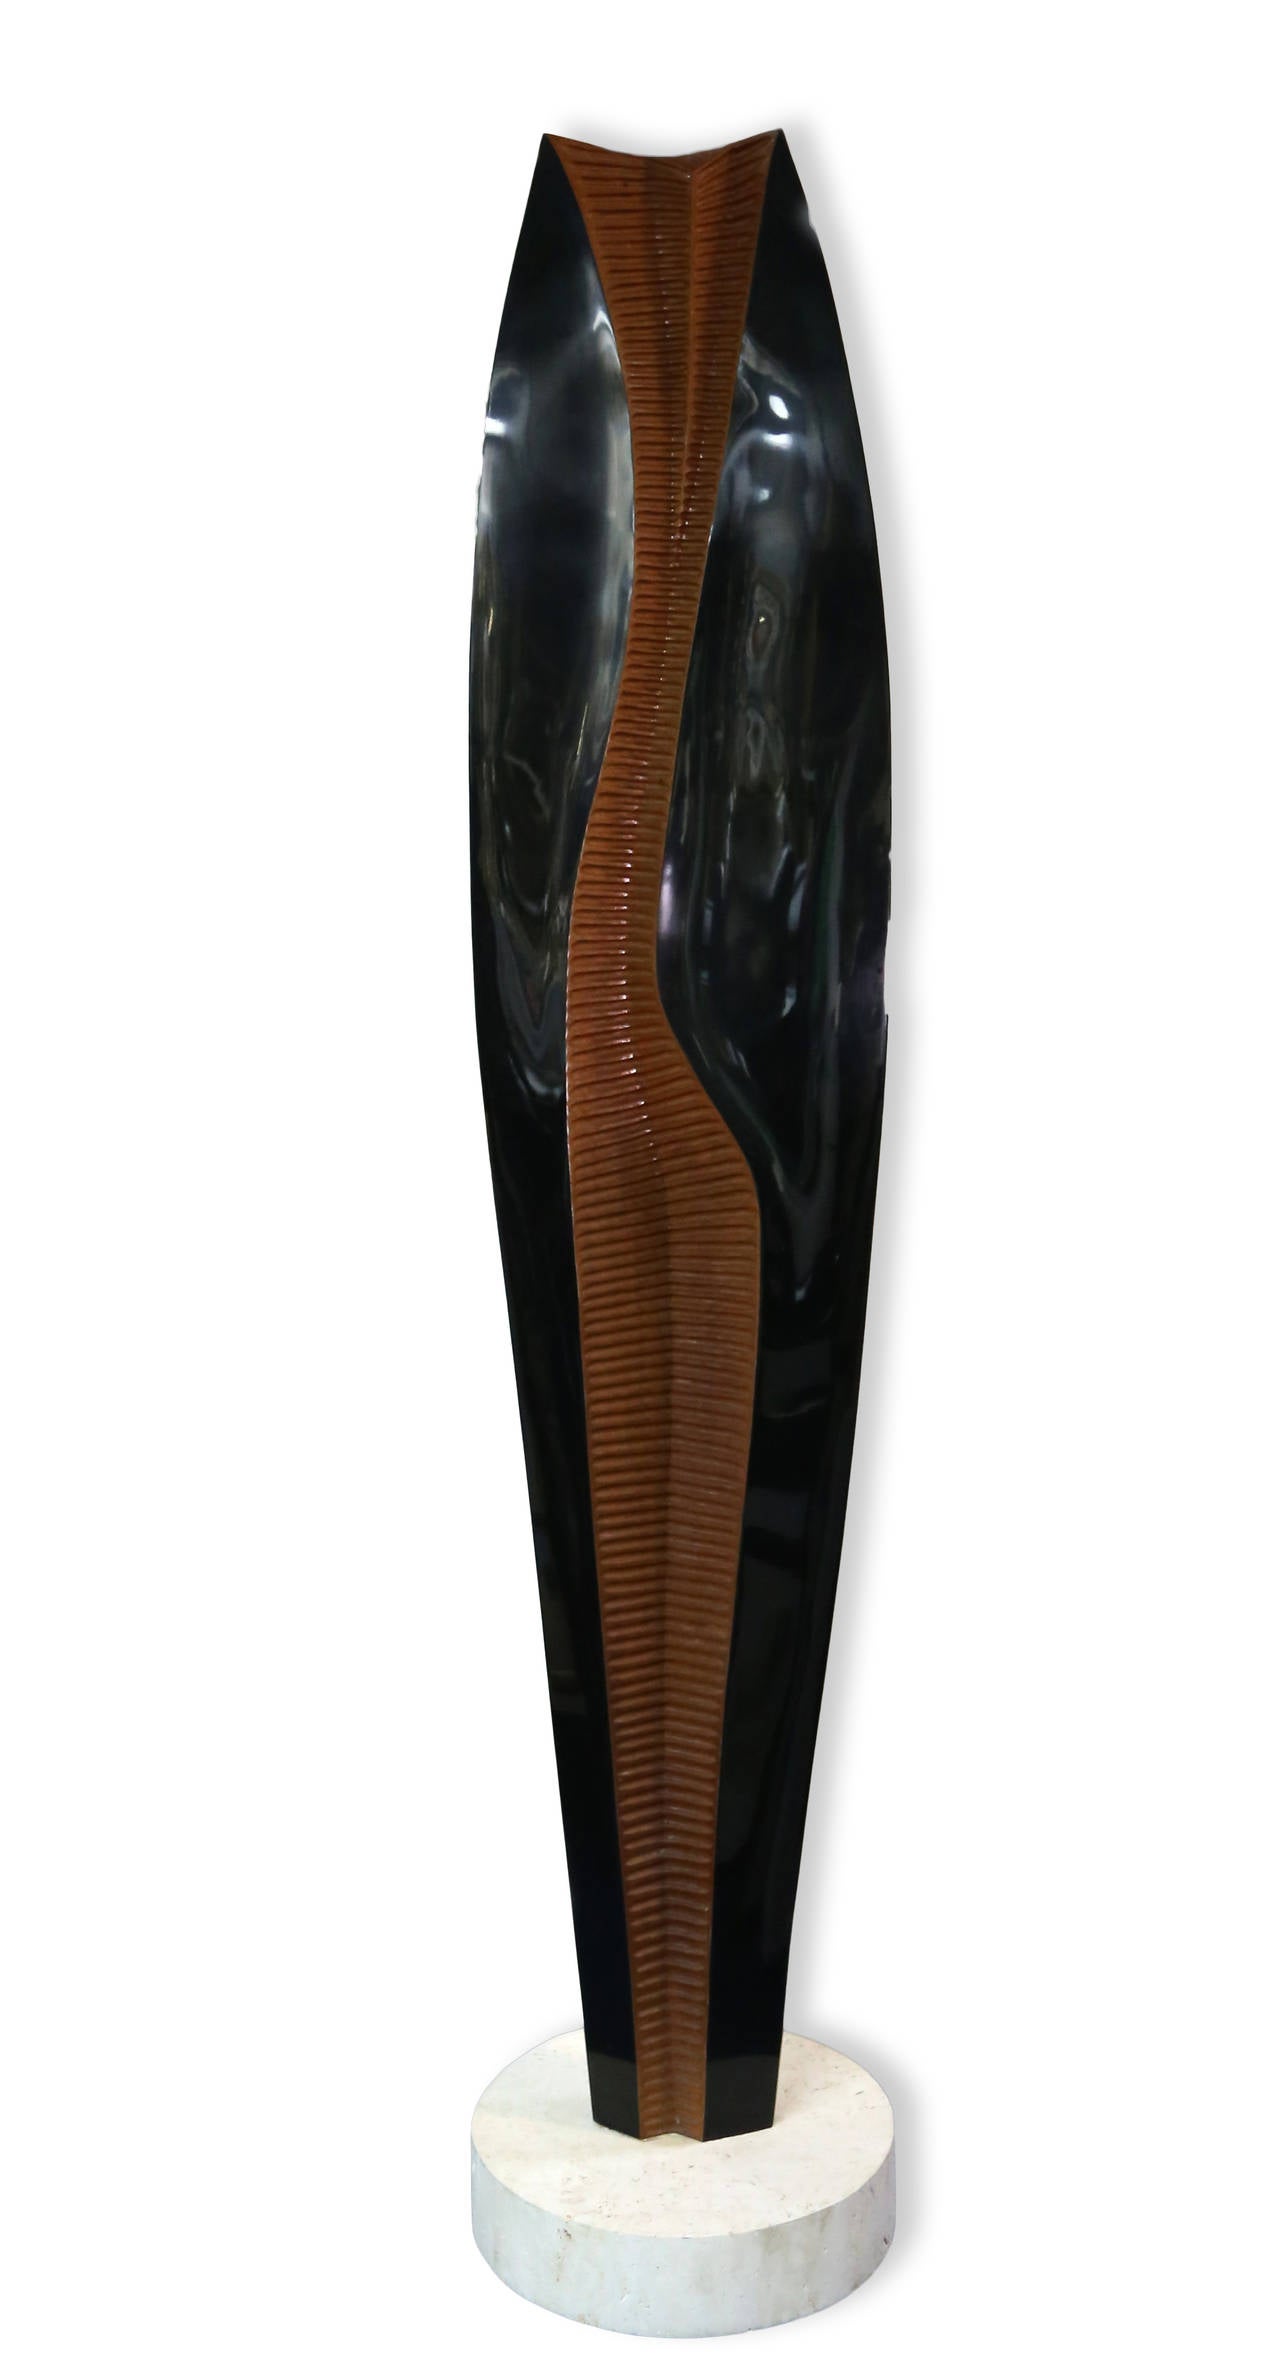 Henry Moretti Abstract Sculpture - Abstract Female Figure, Large Standing Sculpture by Henri Moretti